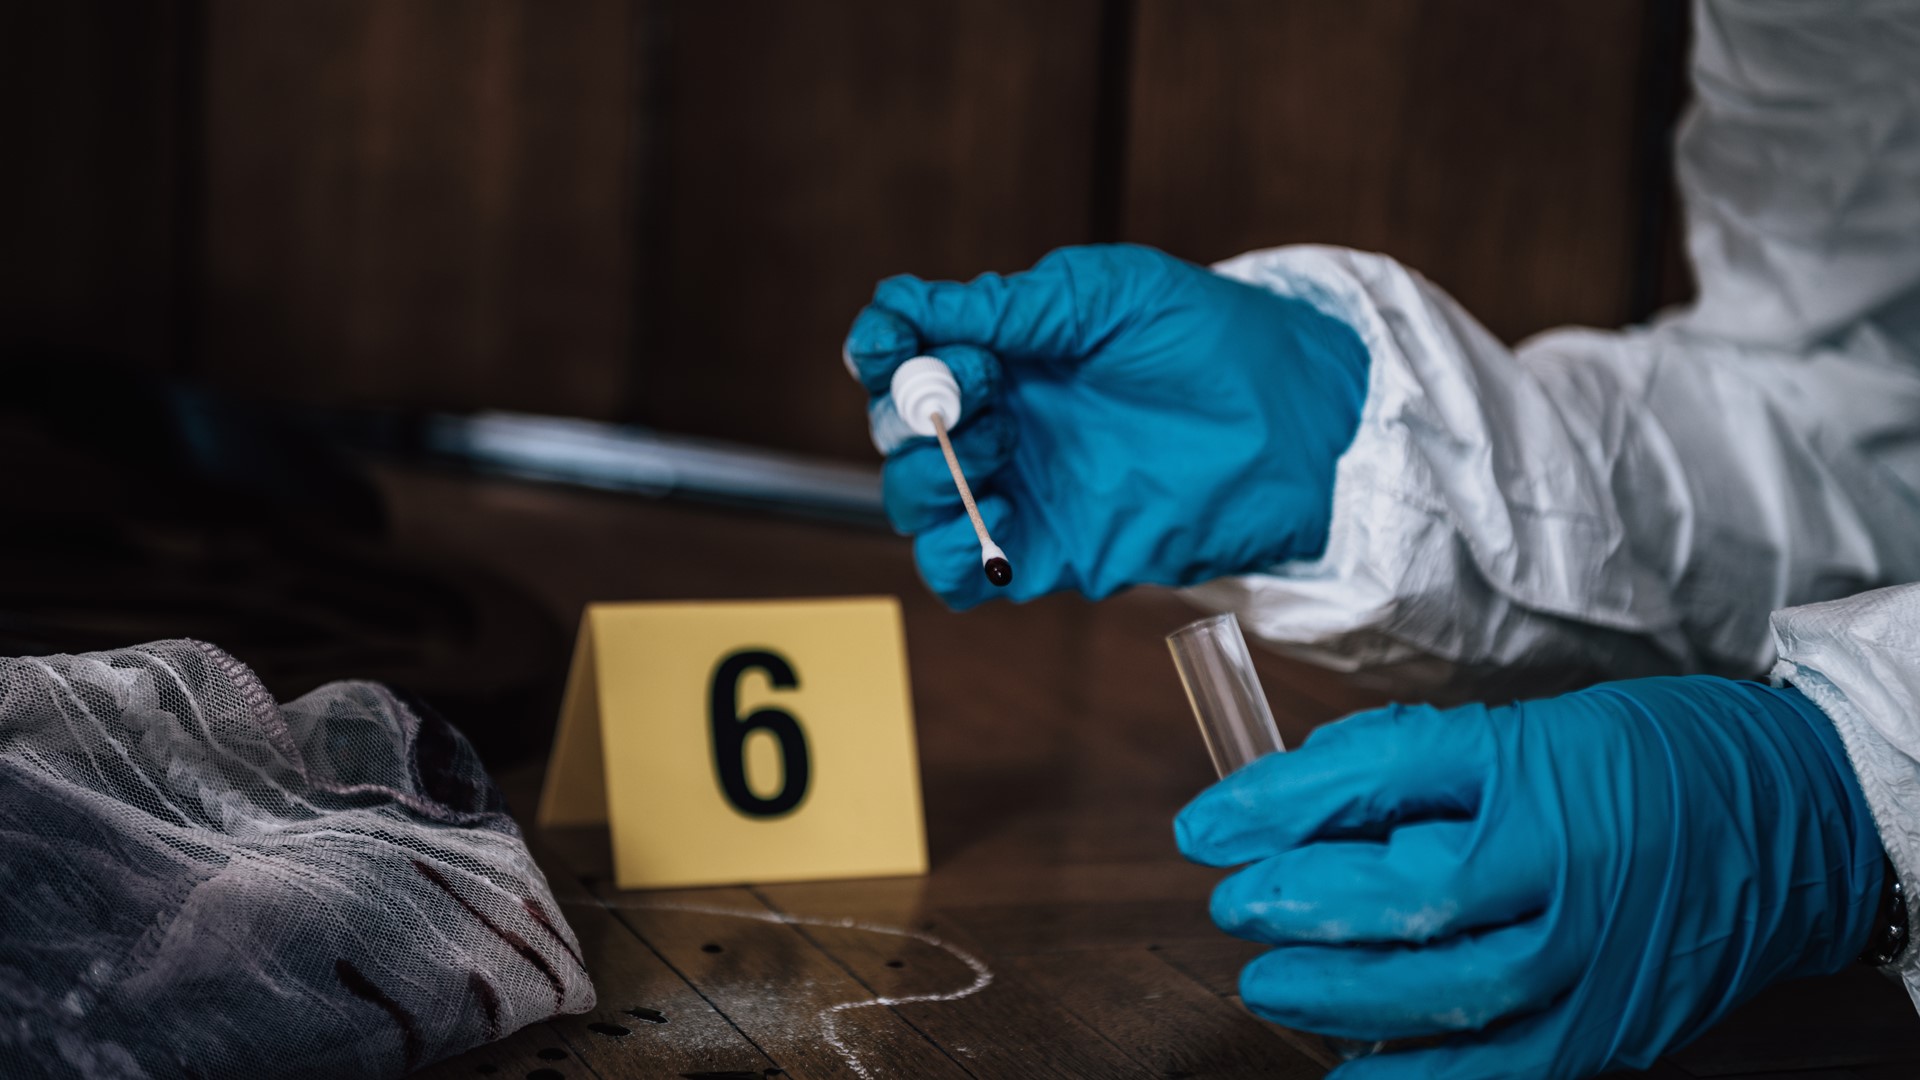 A new audit of D.C.’s Department of Forensic Sciences (DFS) shows it has failed to operate as “an independent part of the justice system,”